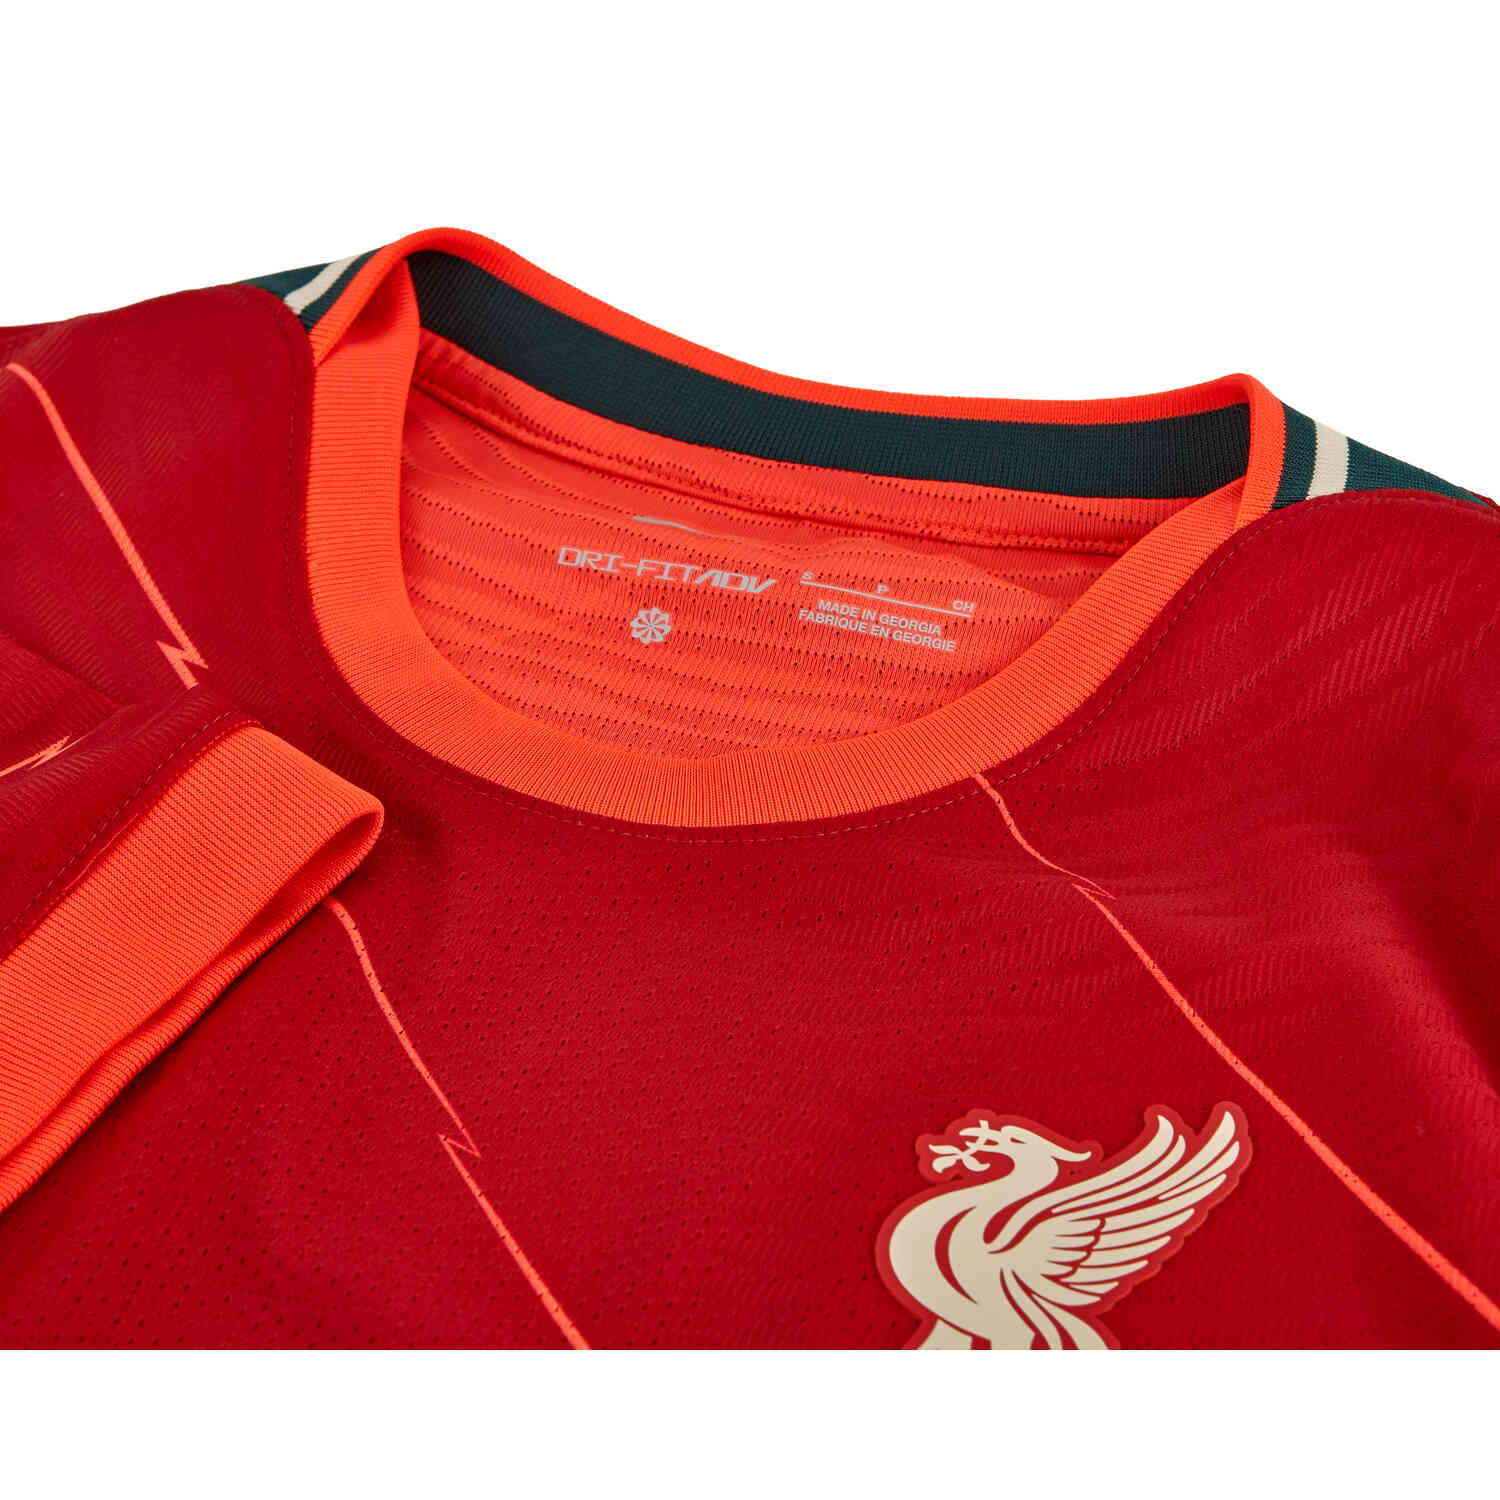 What we know about Liverpool's new Nike kits for 2021/22 so far